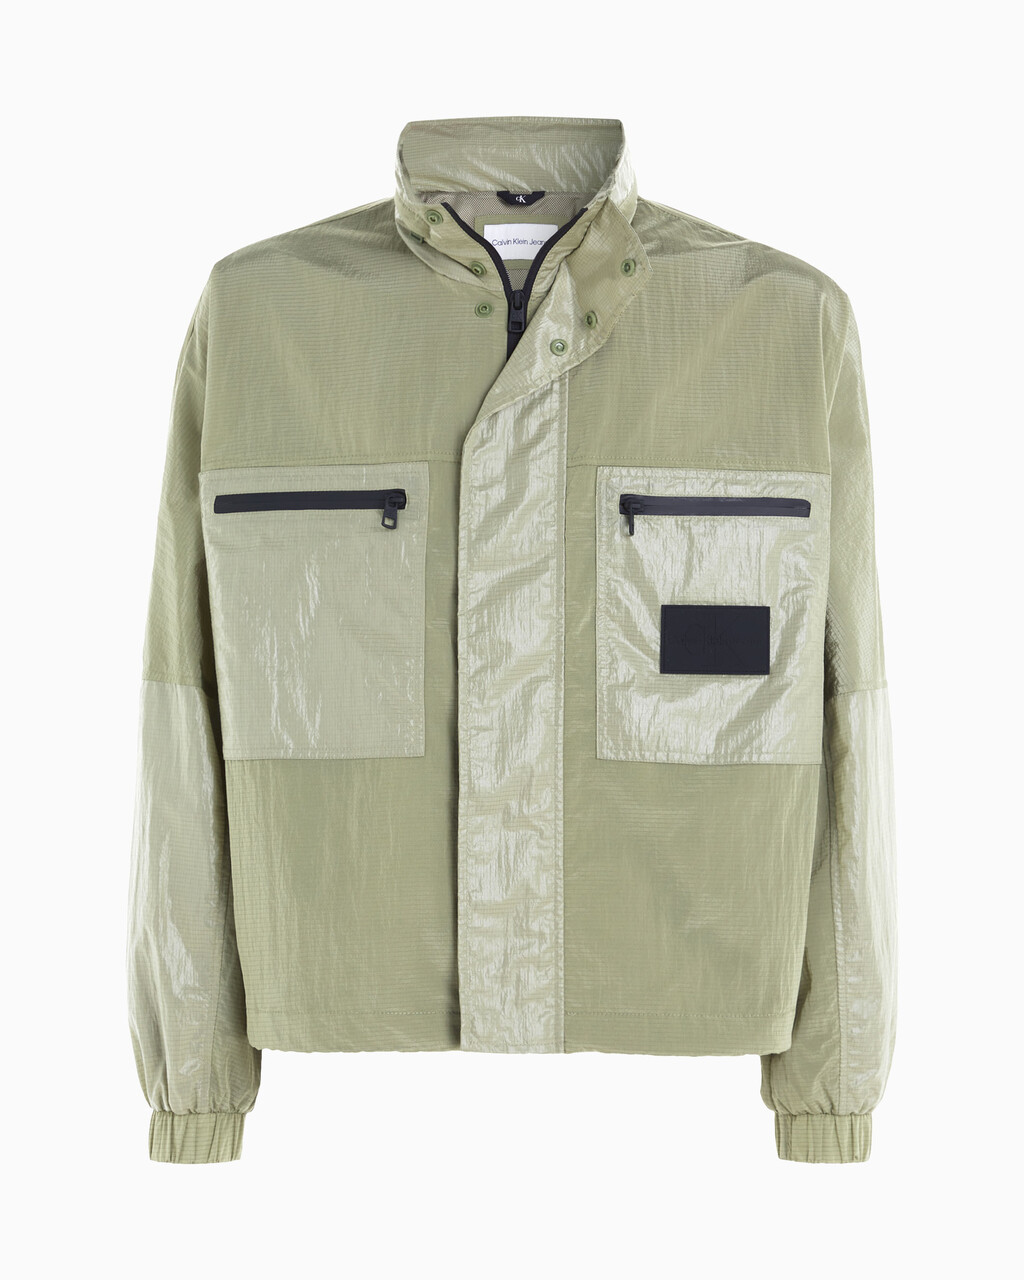 Relaxed Utility Track Jacket, Oil Green, hi-res